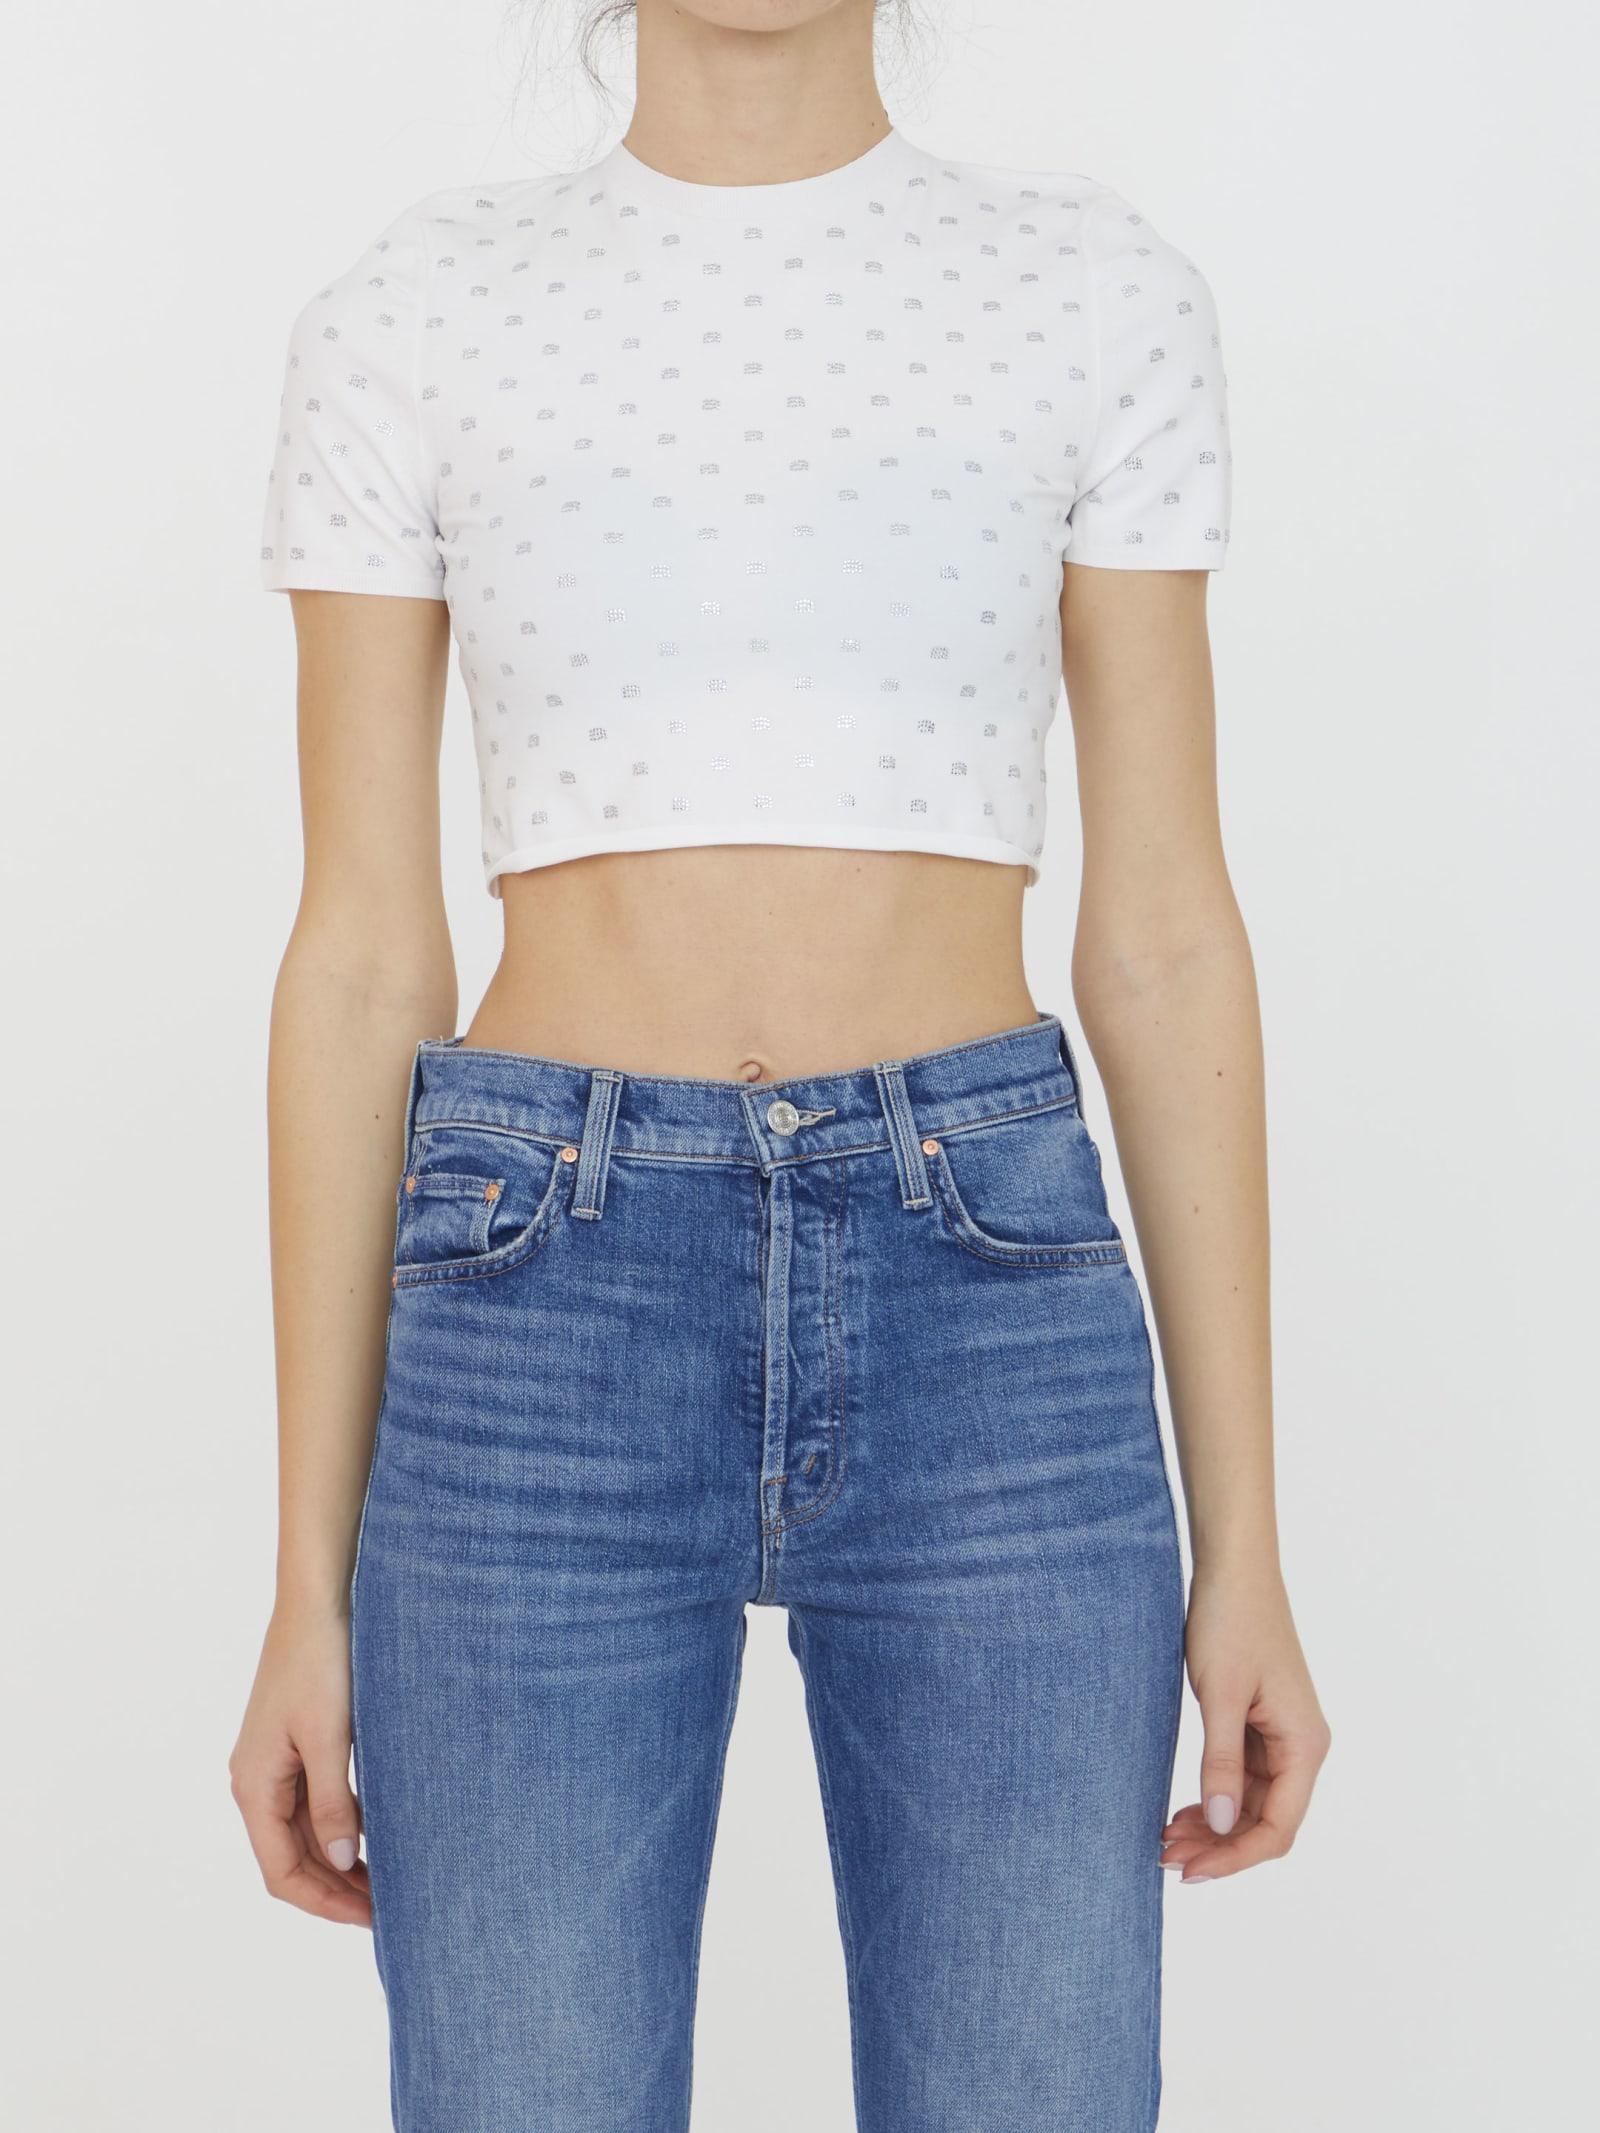 ALEXANDER WANG CROPPED T-SHIRT WITH RHINESTONES